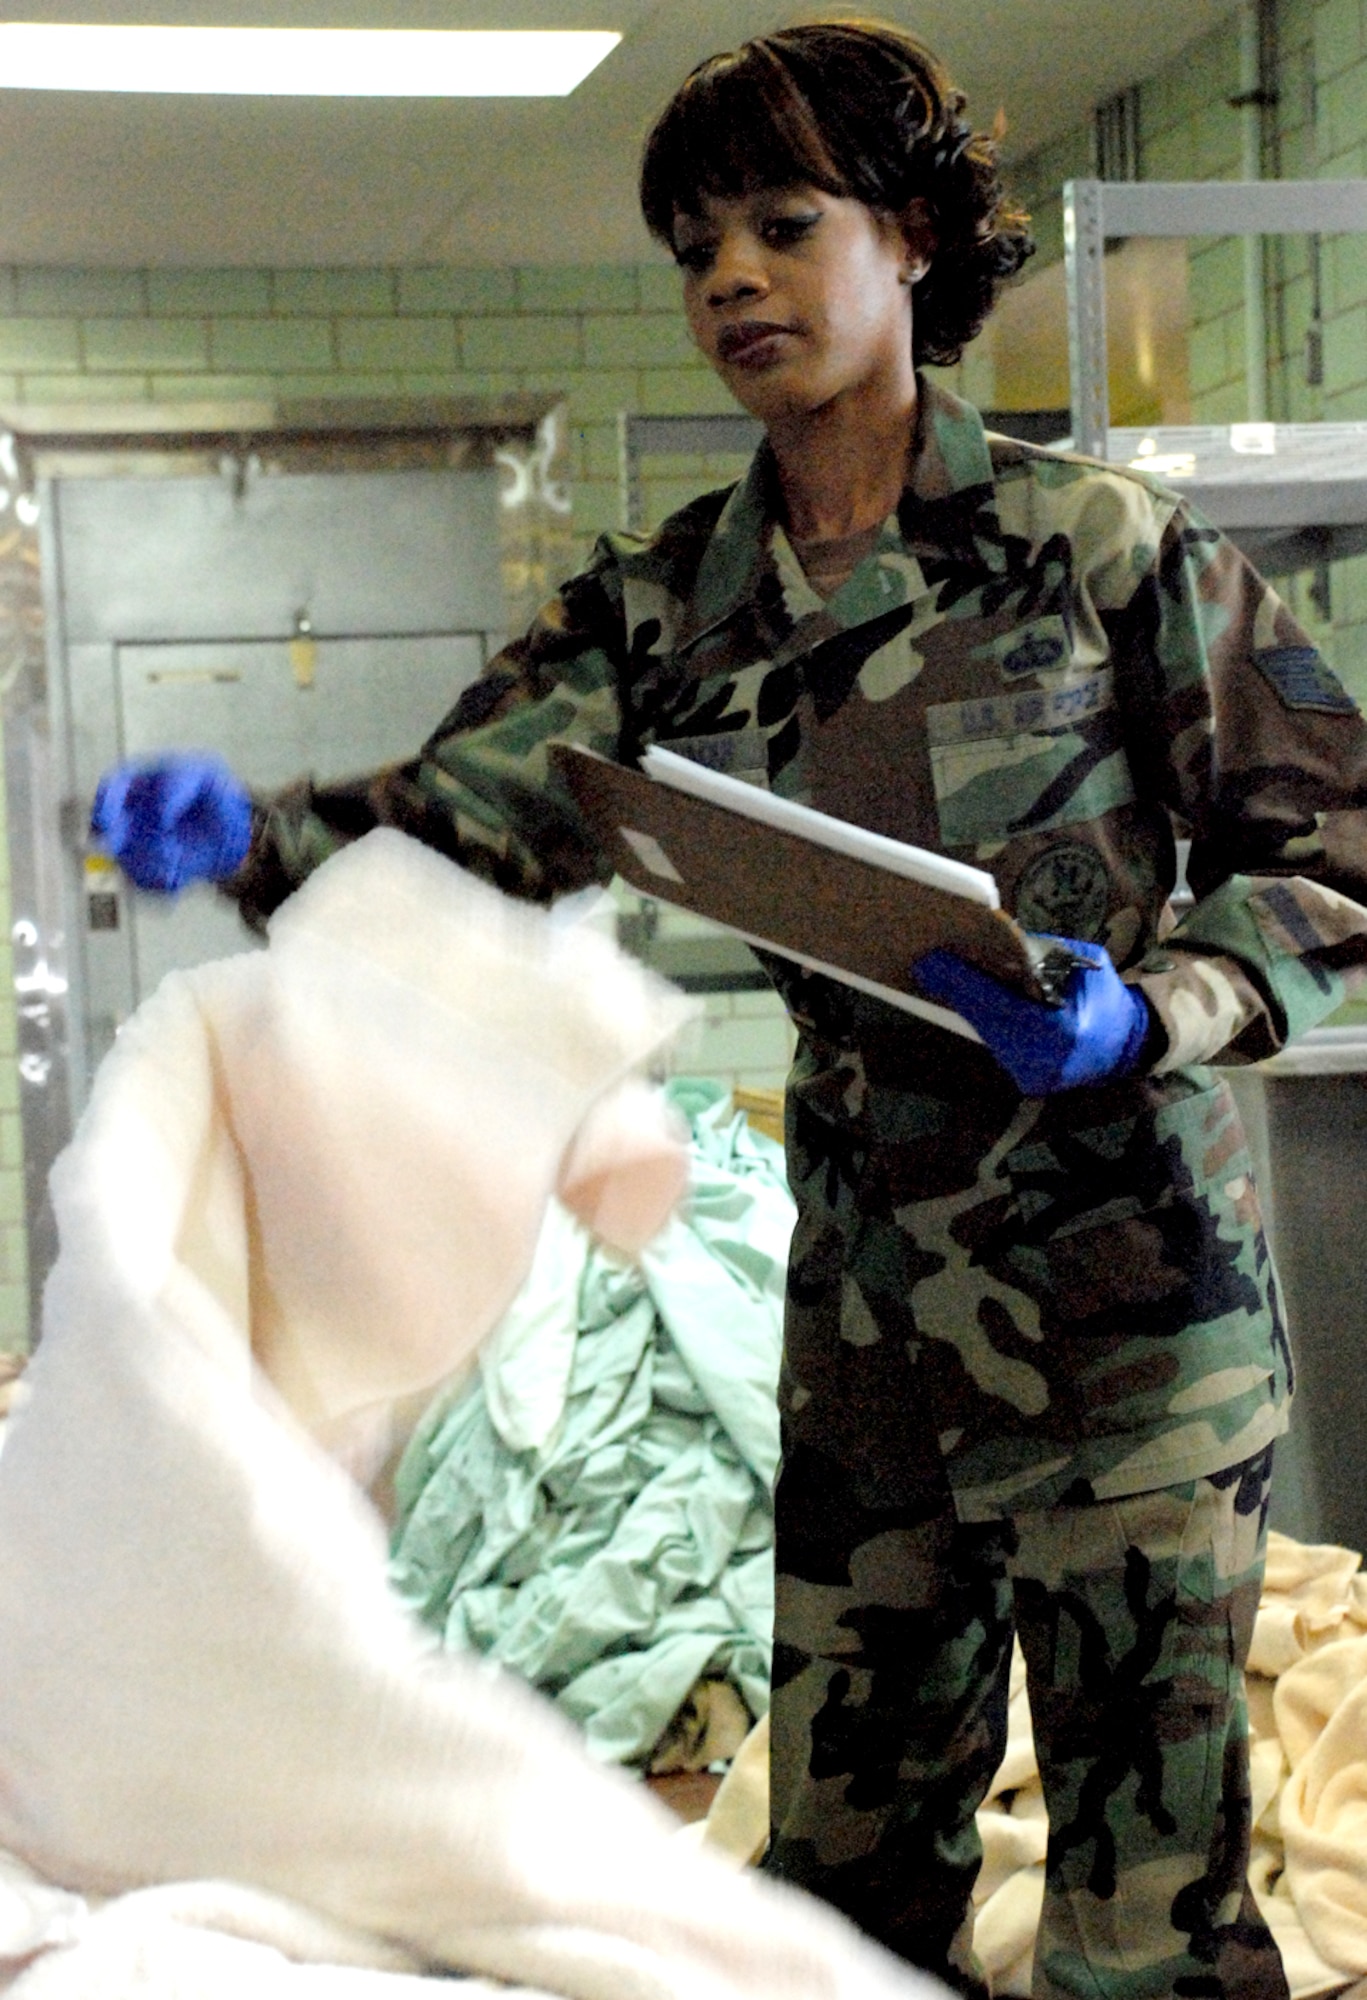 Staff Sgt. Lakeisha El Halloui, 90th Force Support Squadron, counts linen before the contractor arrives Oct. 17. Sergeant El Halloui’s job entails checking and logging any damage done to the linen before it’s shipped off to be cleaned (Photo by Airman 1st Class Daryl Knee).